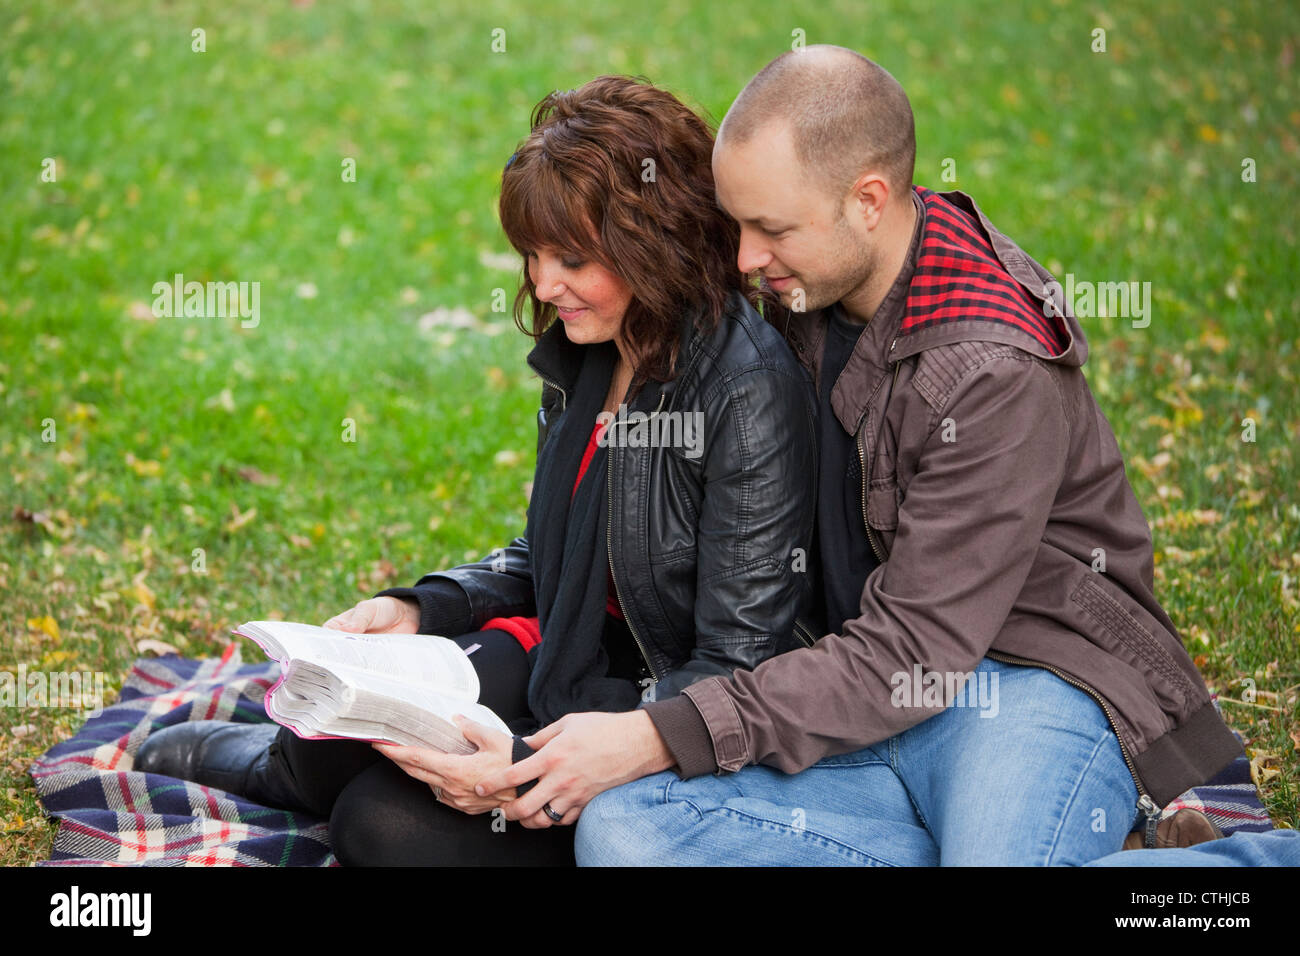 Couple Reading Bible Together In The Park; Edmonton, Alberta, Canada Stock Photo